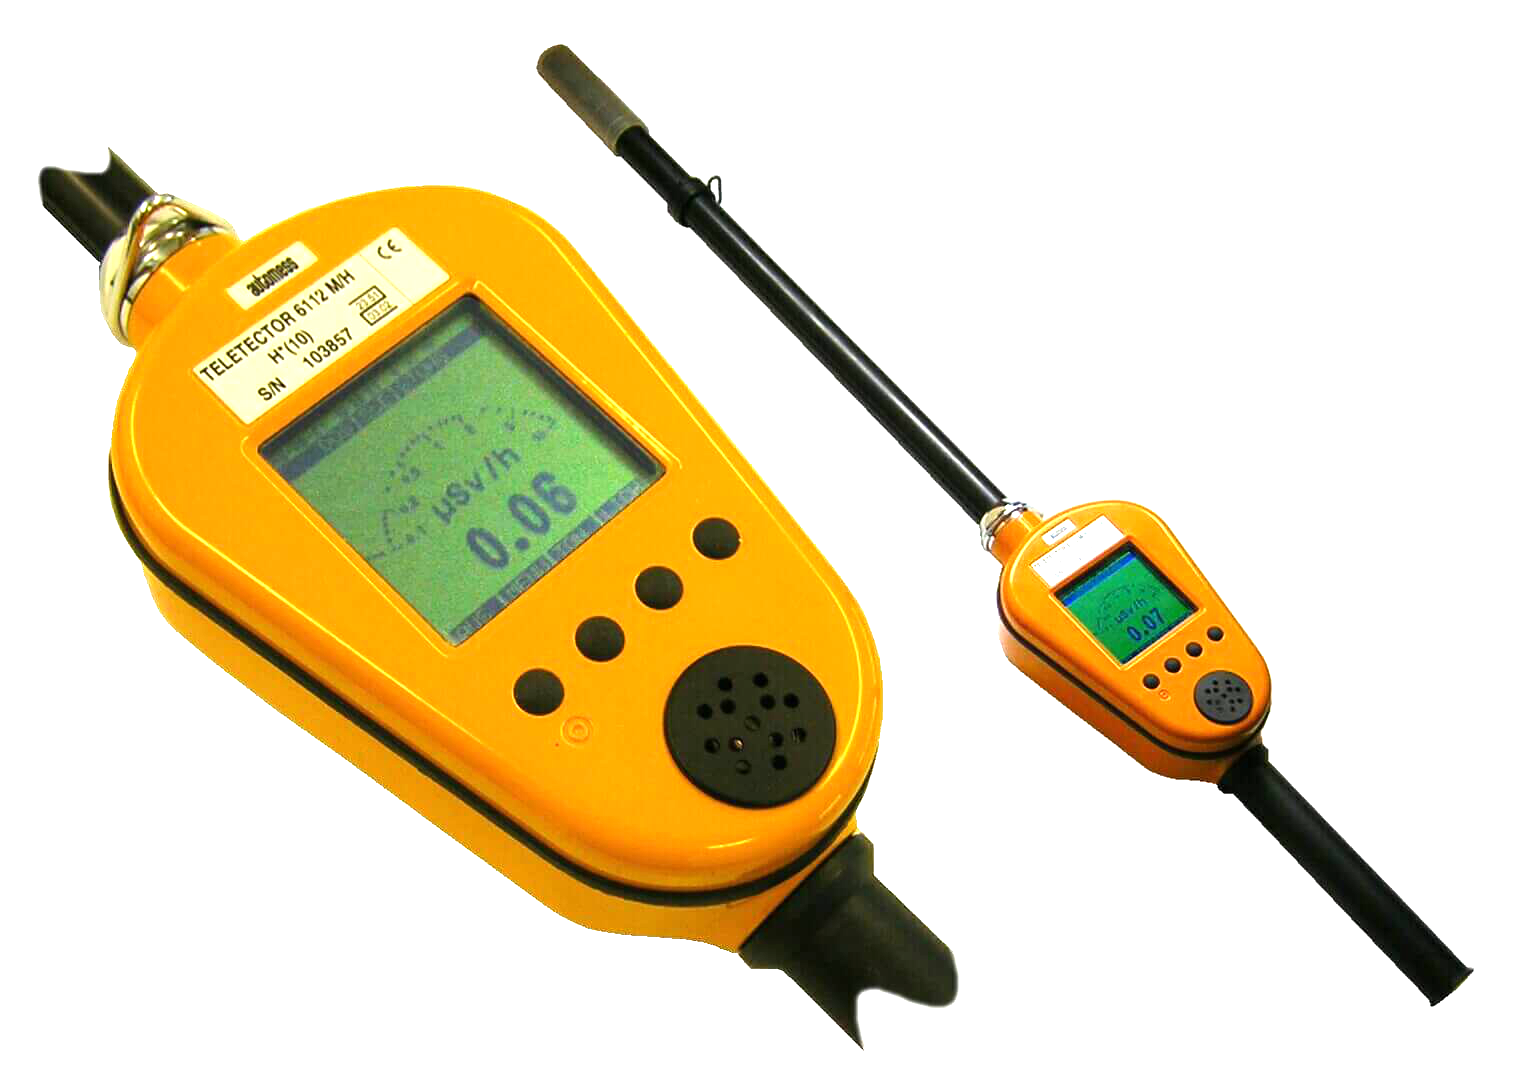 6112M Teletector telescoping ratemeter from Automess